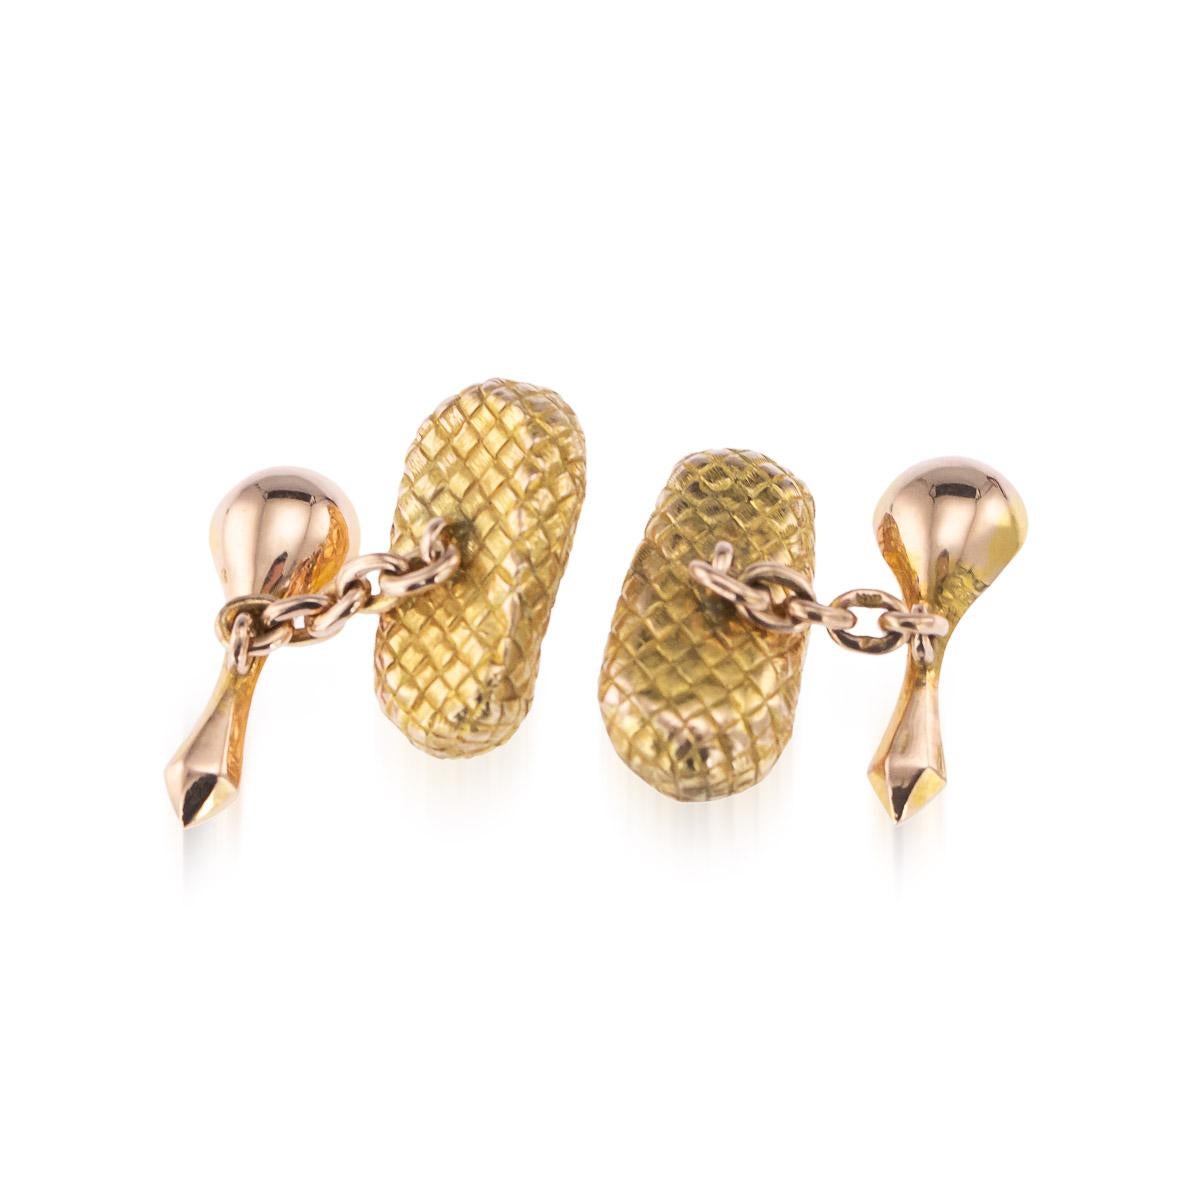 Antique early 20th century Imperial Russian Faberge 56 gold novelty cufflinks, shaped as a pair of lapti, shoes made primarily from bast, fiber taken from the bark of trees such as linden or birch. They are a kind of basket, woven and fitted to the